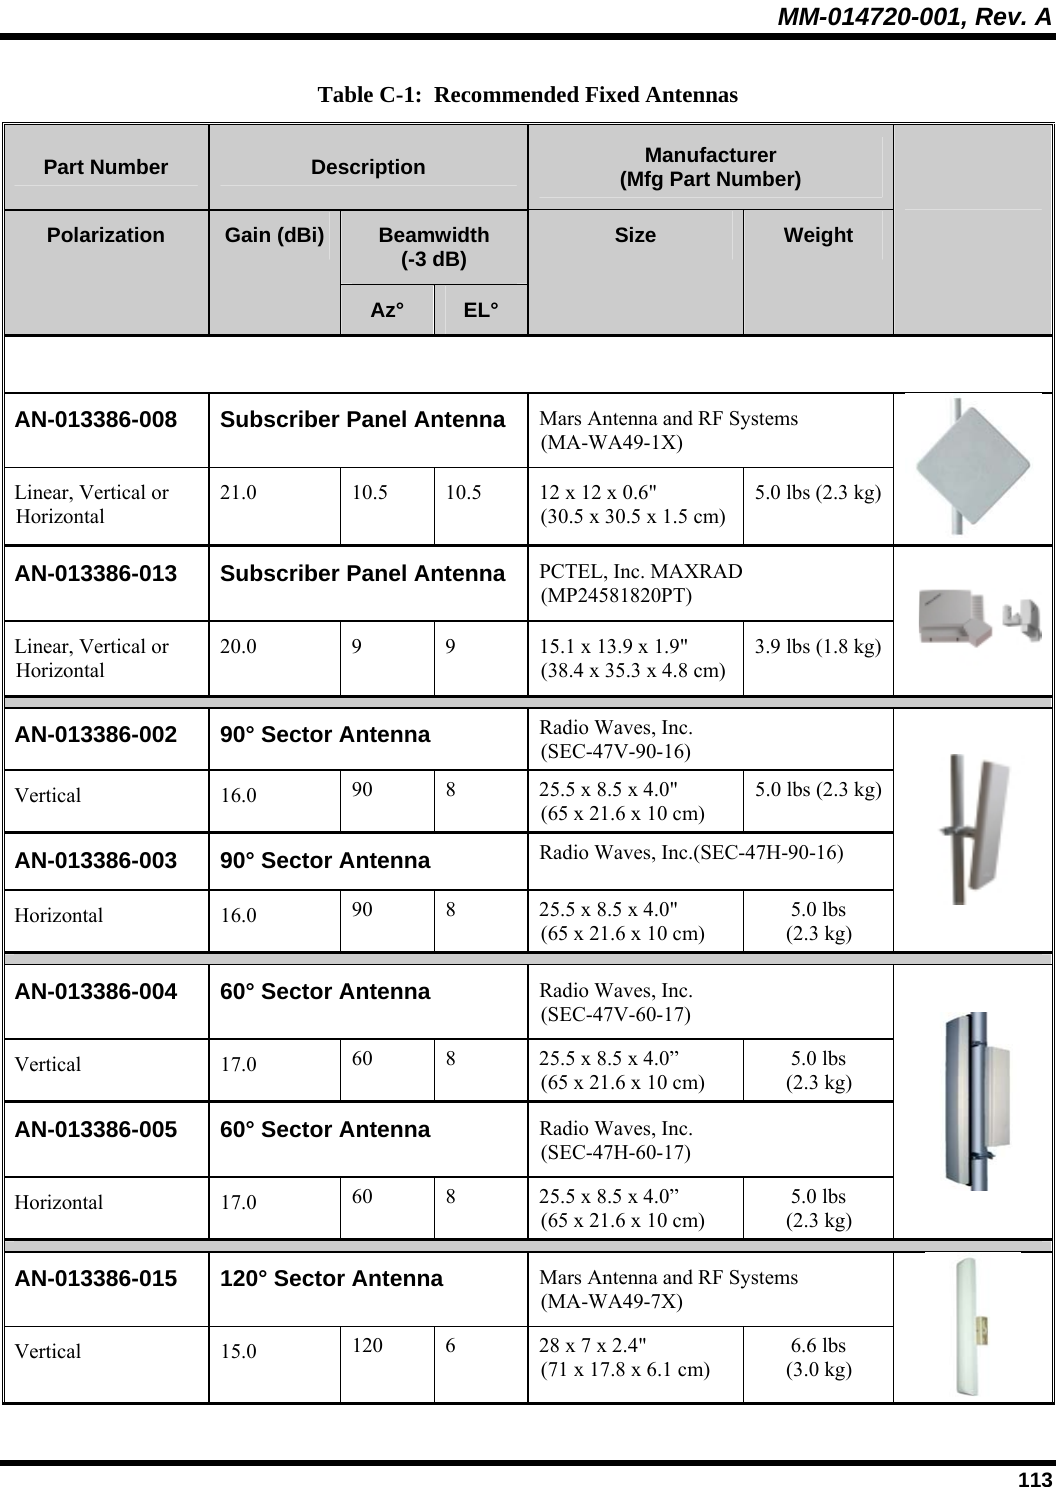 MM-014720-001, Rev. A  113 Table C-1:  Recommended Fixed Antennas Part Number  Description  Manufacturer (Mfg Part Number) Beamwidth (-3 dB) Polarization  Gain (dBi) Az°  EL° Size  Weight    AN-013386-008 Subscriber Panel Antenna Mars Antenna and RF Systems  (MA-WA49-1X) Linear, Vertical or Horizontal 21.0  10.5  10.5  12 x 12 x 0.6&quot;  (30.5 x 30.5 x 1.5 cm) 5.0 lbs (2.3 kg) AN-013386-013 Subscriber Panel Antenna PCTEL, Inc. MAXRAD (MP24581820PT) Linear, Vertical or Horizontal 20.0  9  9  15.1 x 13.9 x 1.9&quot;   (38.4 x 35.3 x 4.8 cm) 3.9 lbs (1.8 kg)  AN-013386-002 90° Sector Antenna  Radio Waves, Inc. (SEC-47V-90-16) Vertical 16.0 90  8  25.5 x 8.5 x 4.0&quot;  (65 x 21.6 x 10 cm) 5.0 lbs (2.3 kg) AN-013386-003 90° Sector Antenna  Radio Waves, Inc.(SEC-47H-90-16) Horizontal 16.0 90  8  25.5 x 8.5 x 4.0&quot;  (65 x 21.6 x 10 cm) 5.0 lbs (2.3 kg)  AN-013386-004 60° Sector Antenna  Radio Waves, Inc. (SEC-47V-60-17) Vertical 17.0 60  8  25.5 x 8.5 x 4.0”  (65 x 21.6 x 10 cm) 5.0 lbs (2.3 kg) AN-013386-005 60° Sector Antenna  Radio Waves, Inc. (SEC-47H-60-17) Horizontal 17.0 60  8  25.5 x 8.5 x 4.0”  (65 x 21.6 x 10 cm) 5.0 lbs (2.3 kg)   AN-013386-015  120° Sector Antenna  Mars Antenna and RF Systems (MA-WA49-7X) Vertical 15.0 120  6  28 x 7 x 2.4&quot;  (71 x 17.8 x 6.1 cm) 6.6 lbs (3.0 kg)  